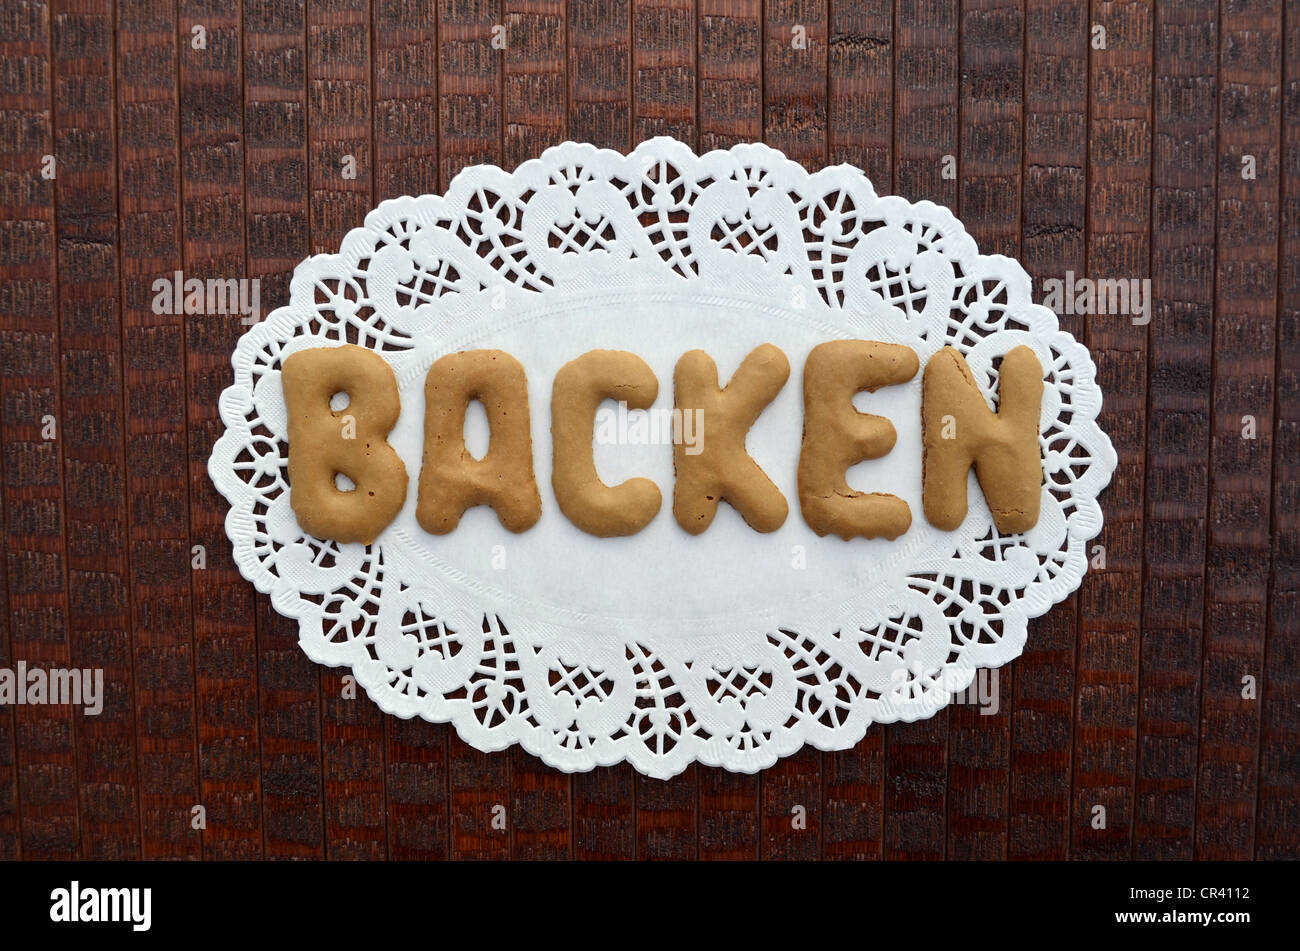 Backen, German for baking, written with alphabet biscuits on a paper doily Stock Photo